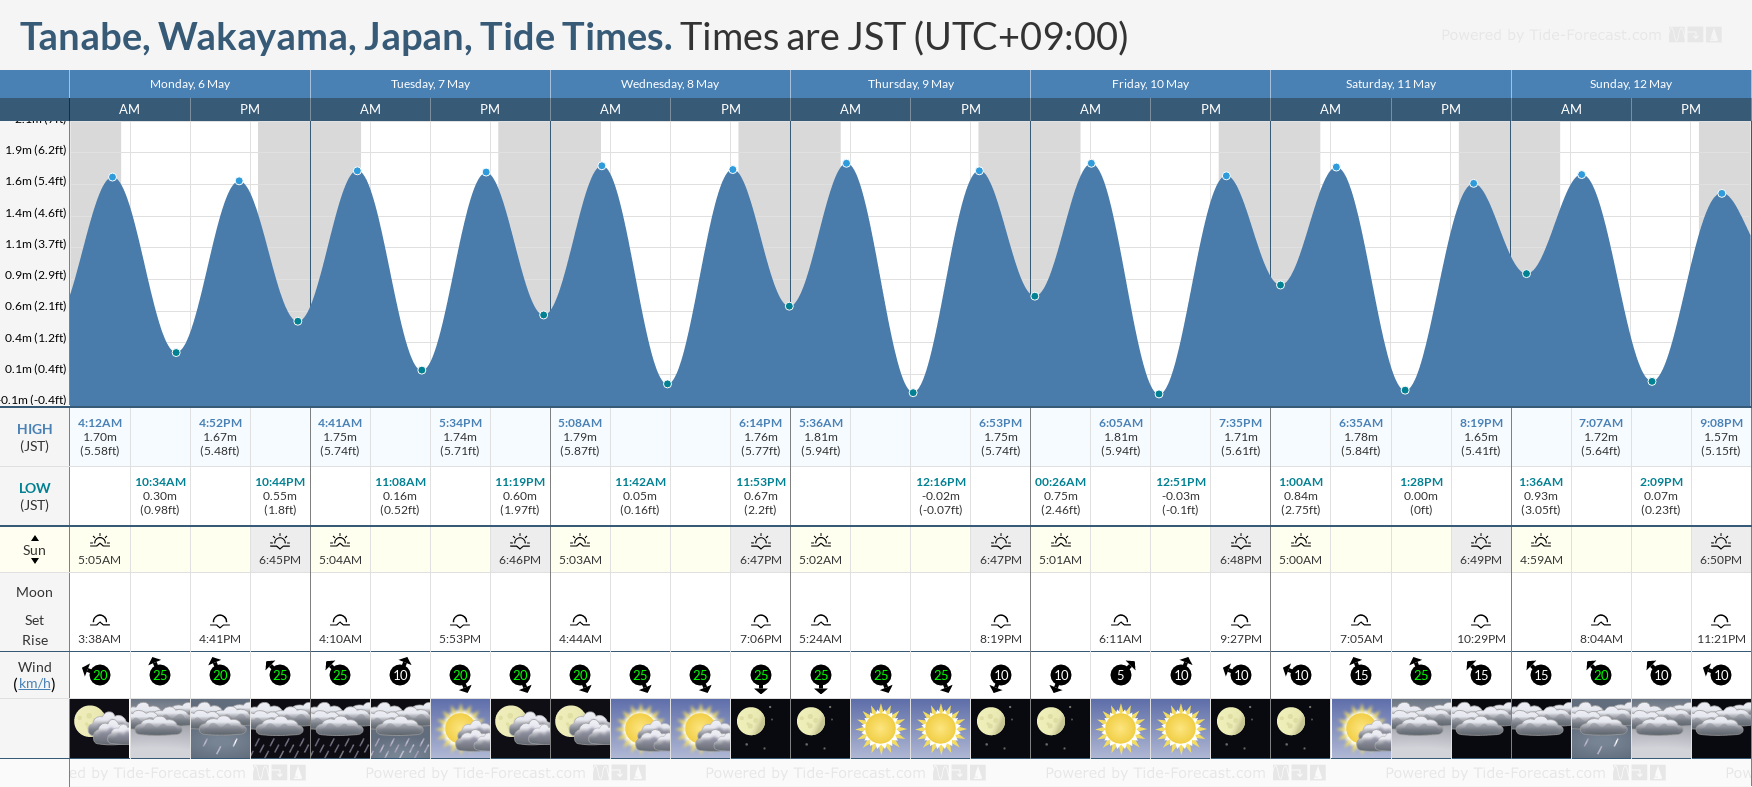 Tanabe, Wakayama, Japan Tide Chart including high and low tide tide times for the next 7 days